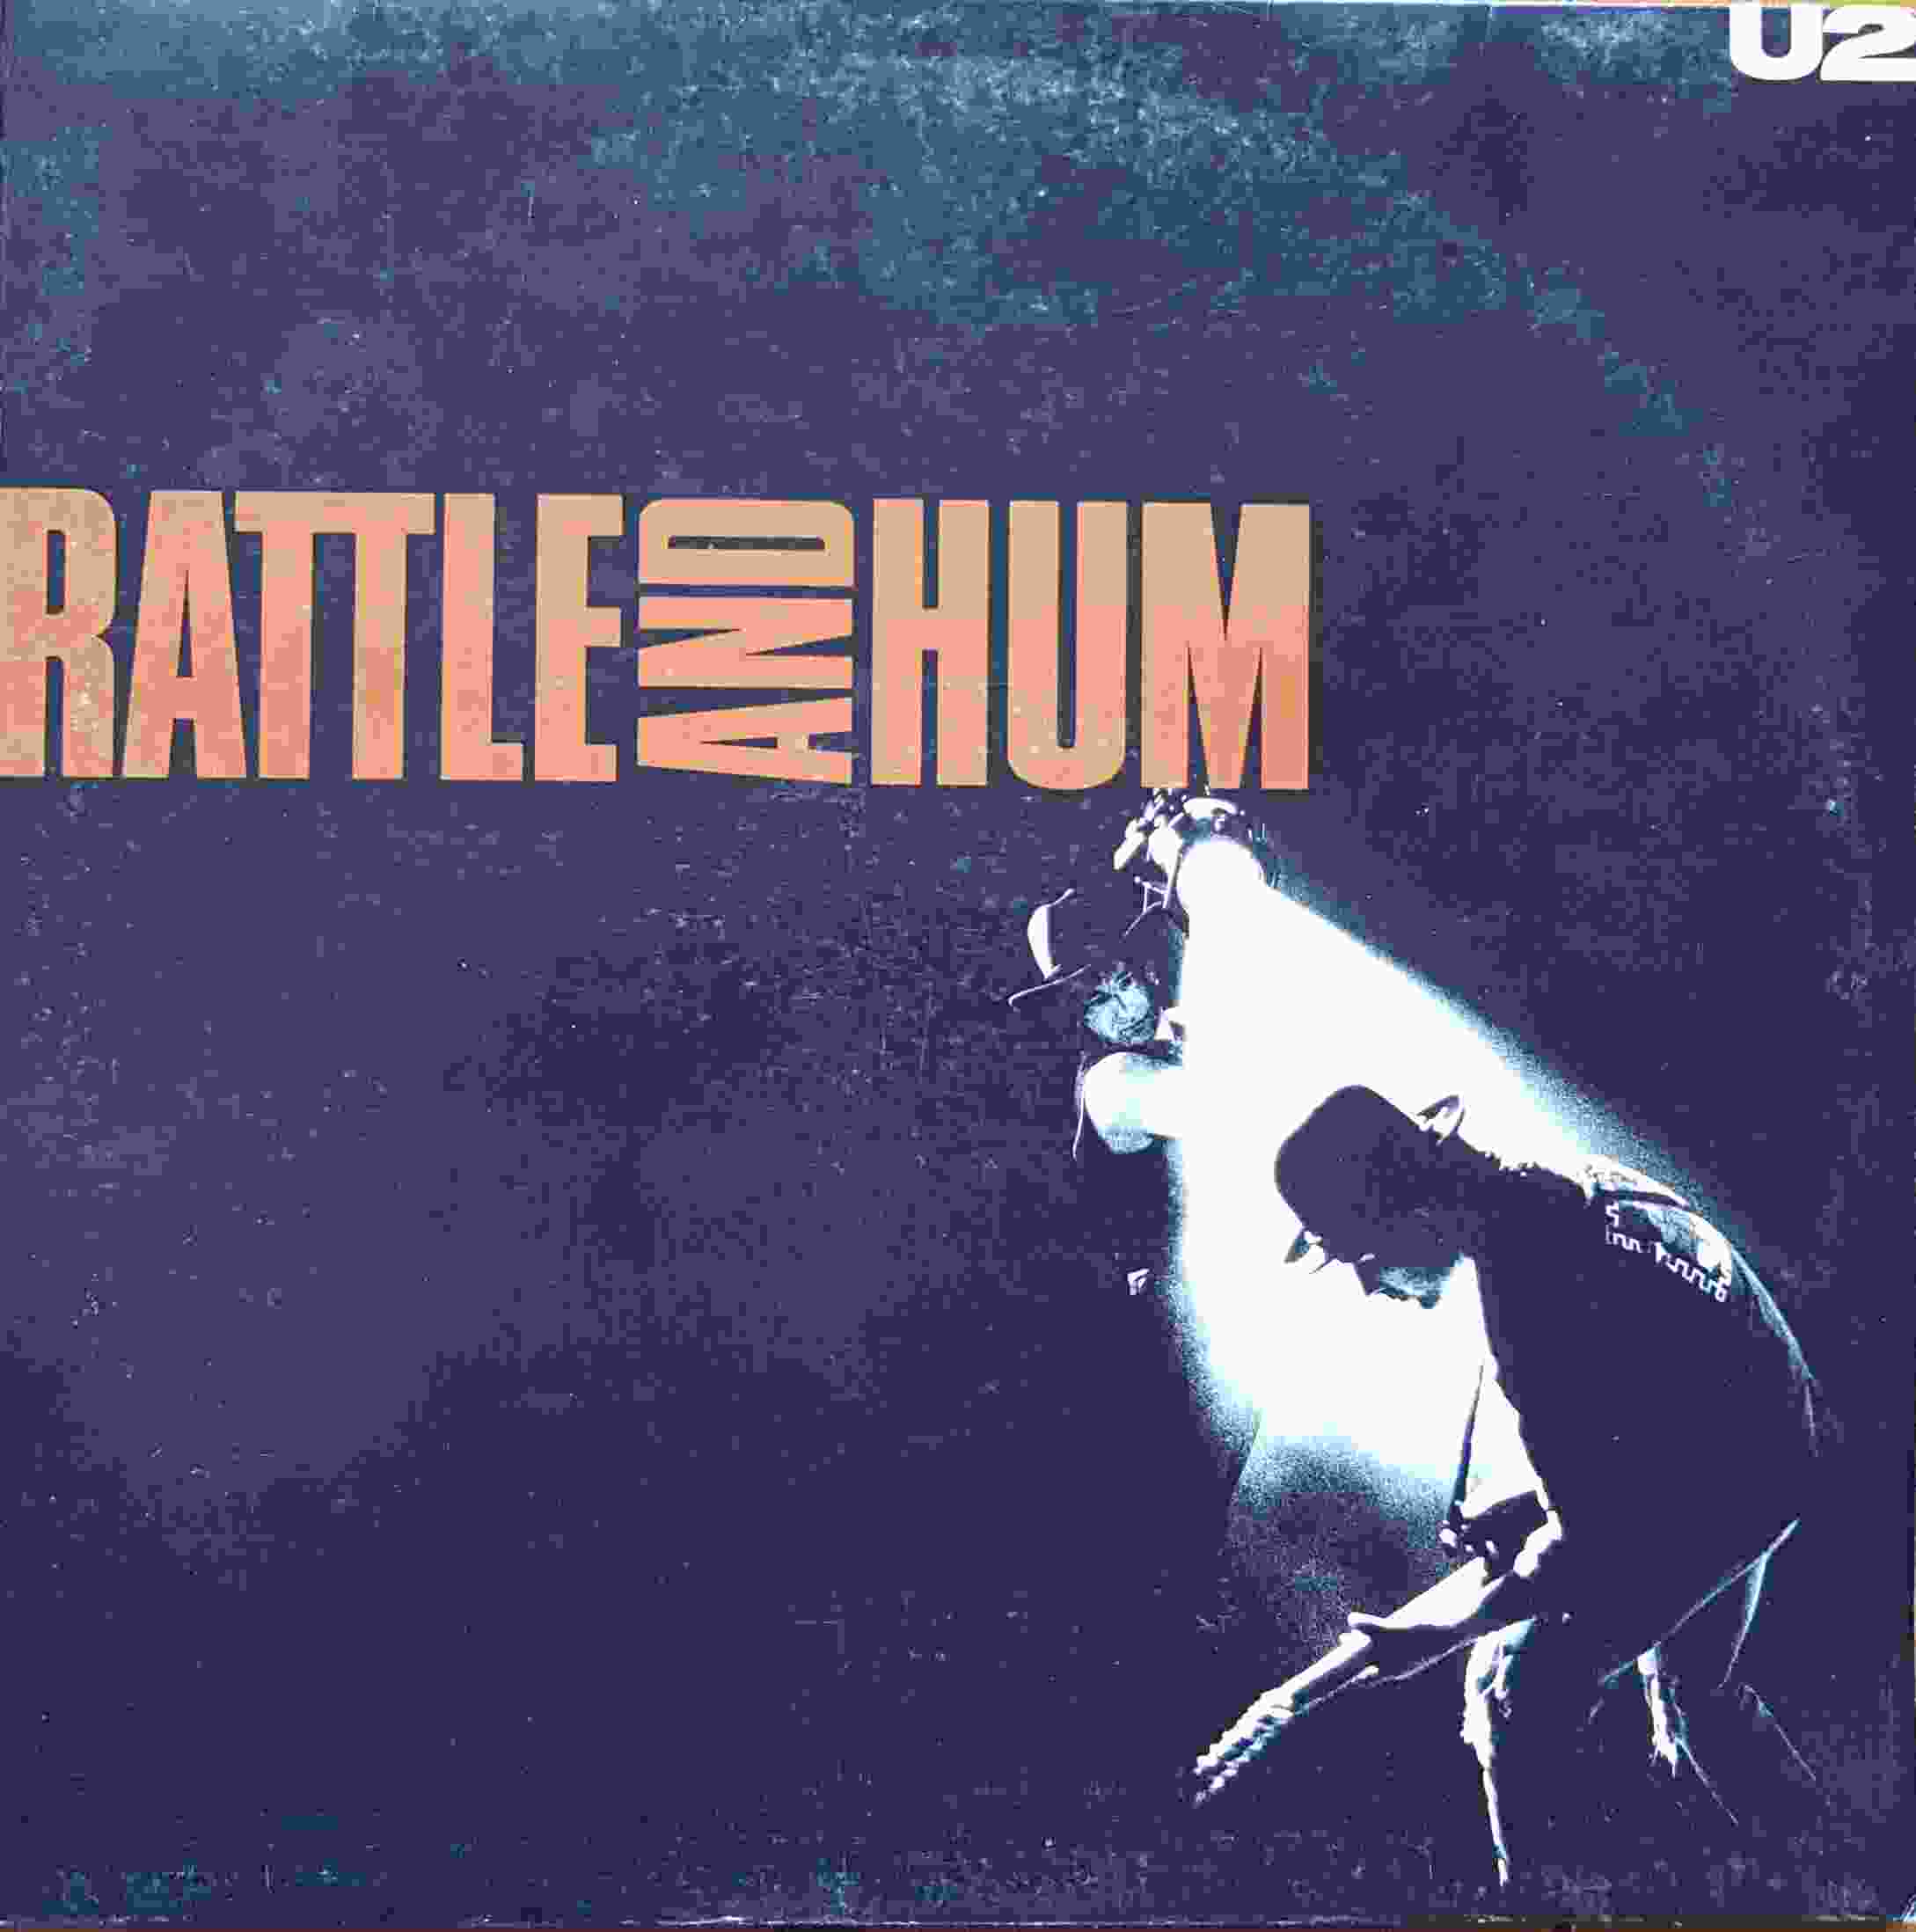 Picture of U 27 Battle and hum by artist U2 